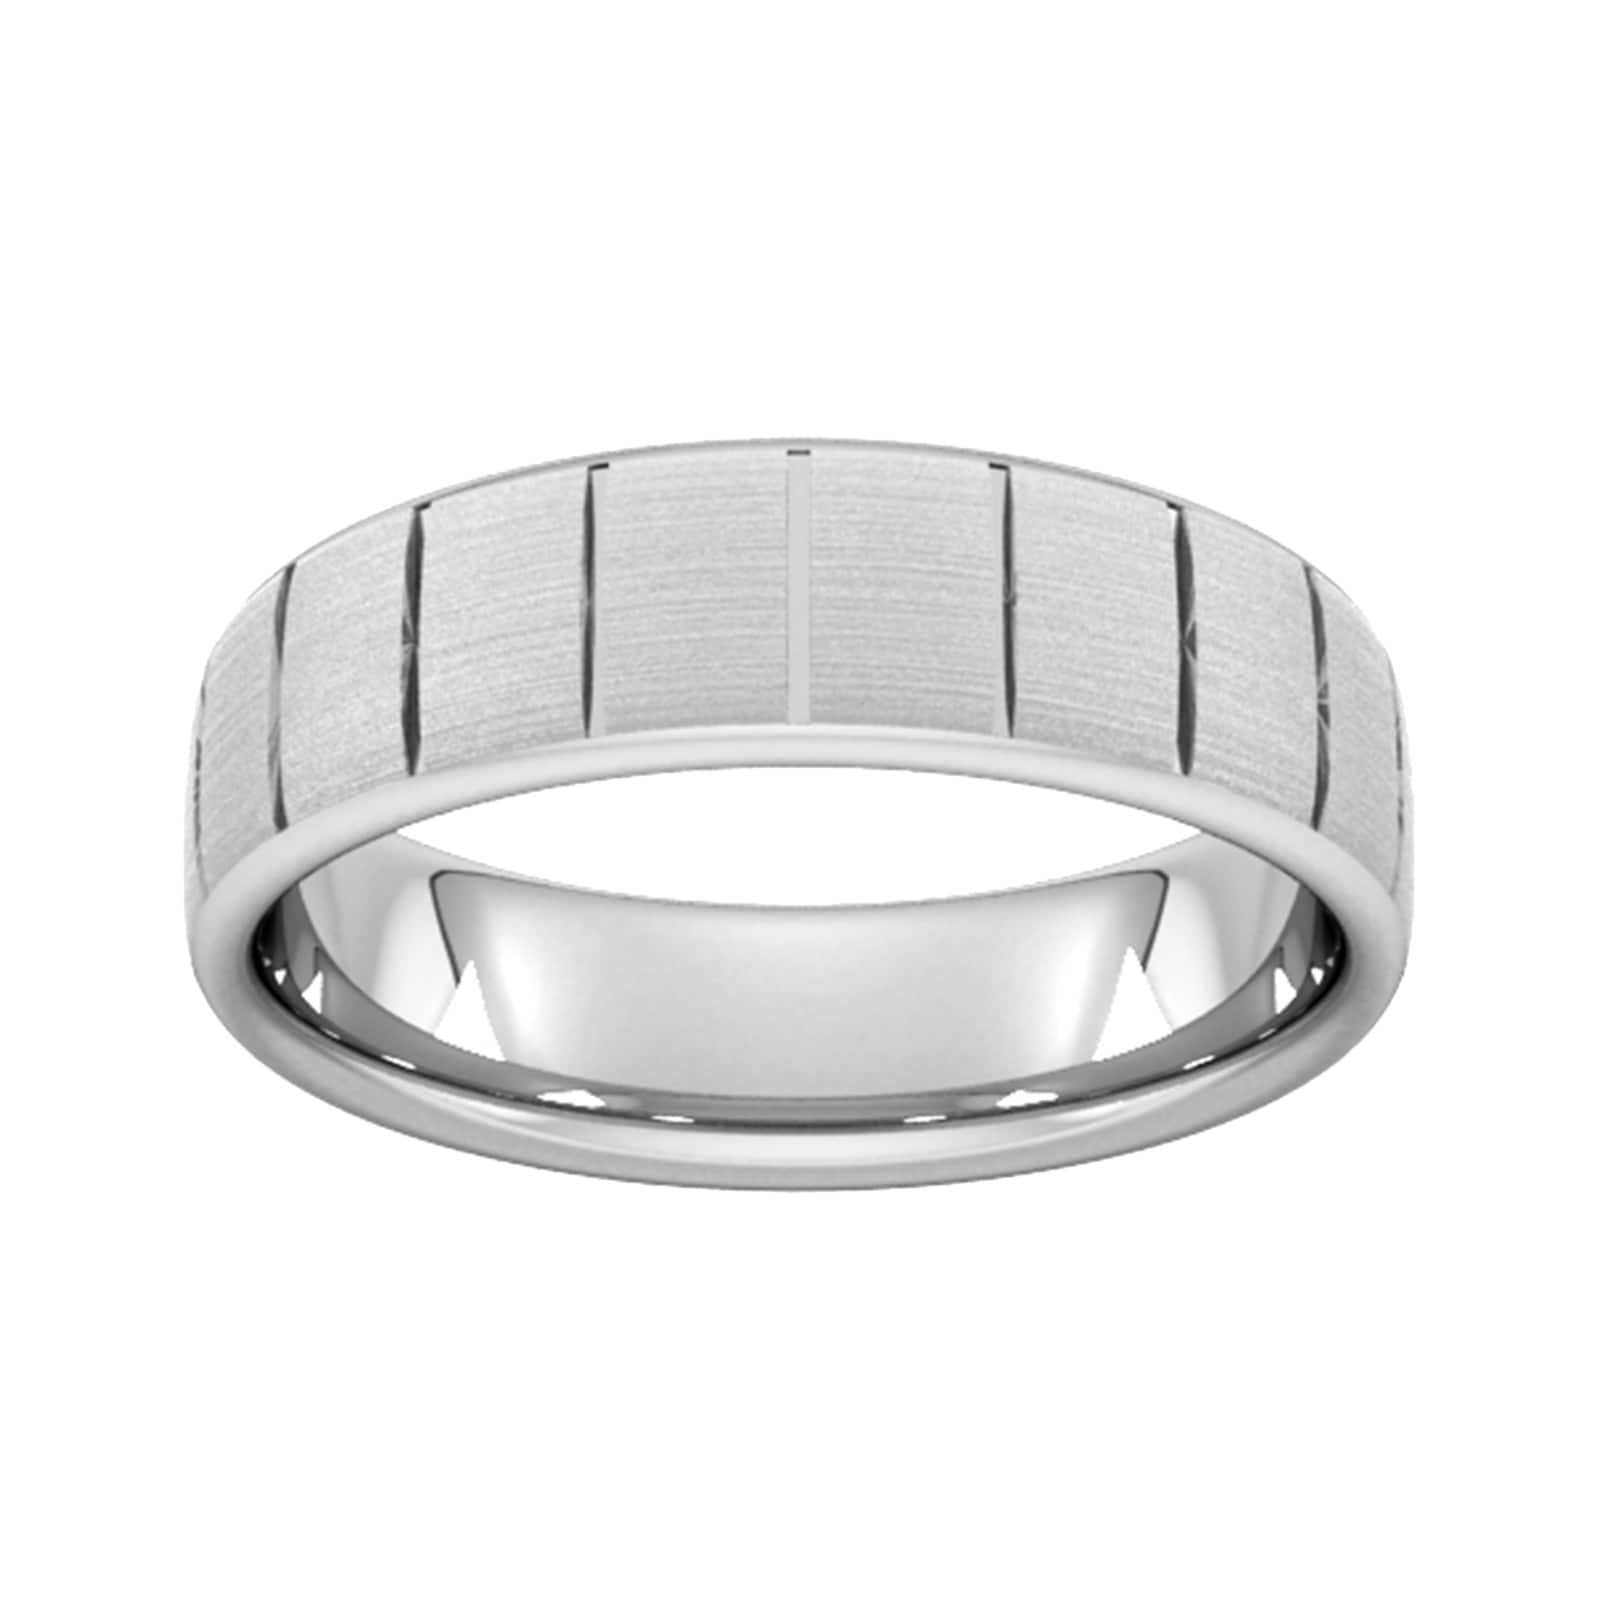 6mm Slight Court Heavy Vertical Lines Wedding Ring In 9 Carat White Gold - Ring Size L